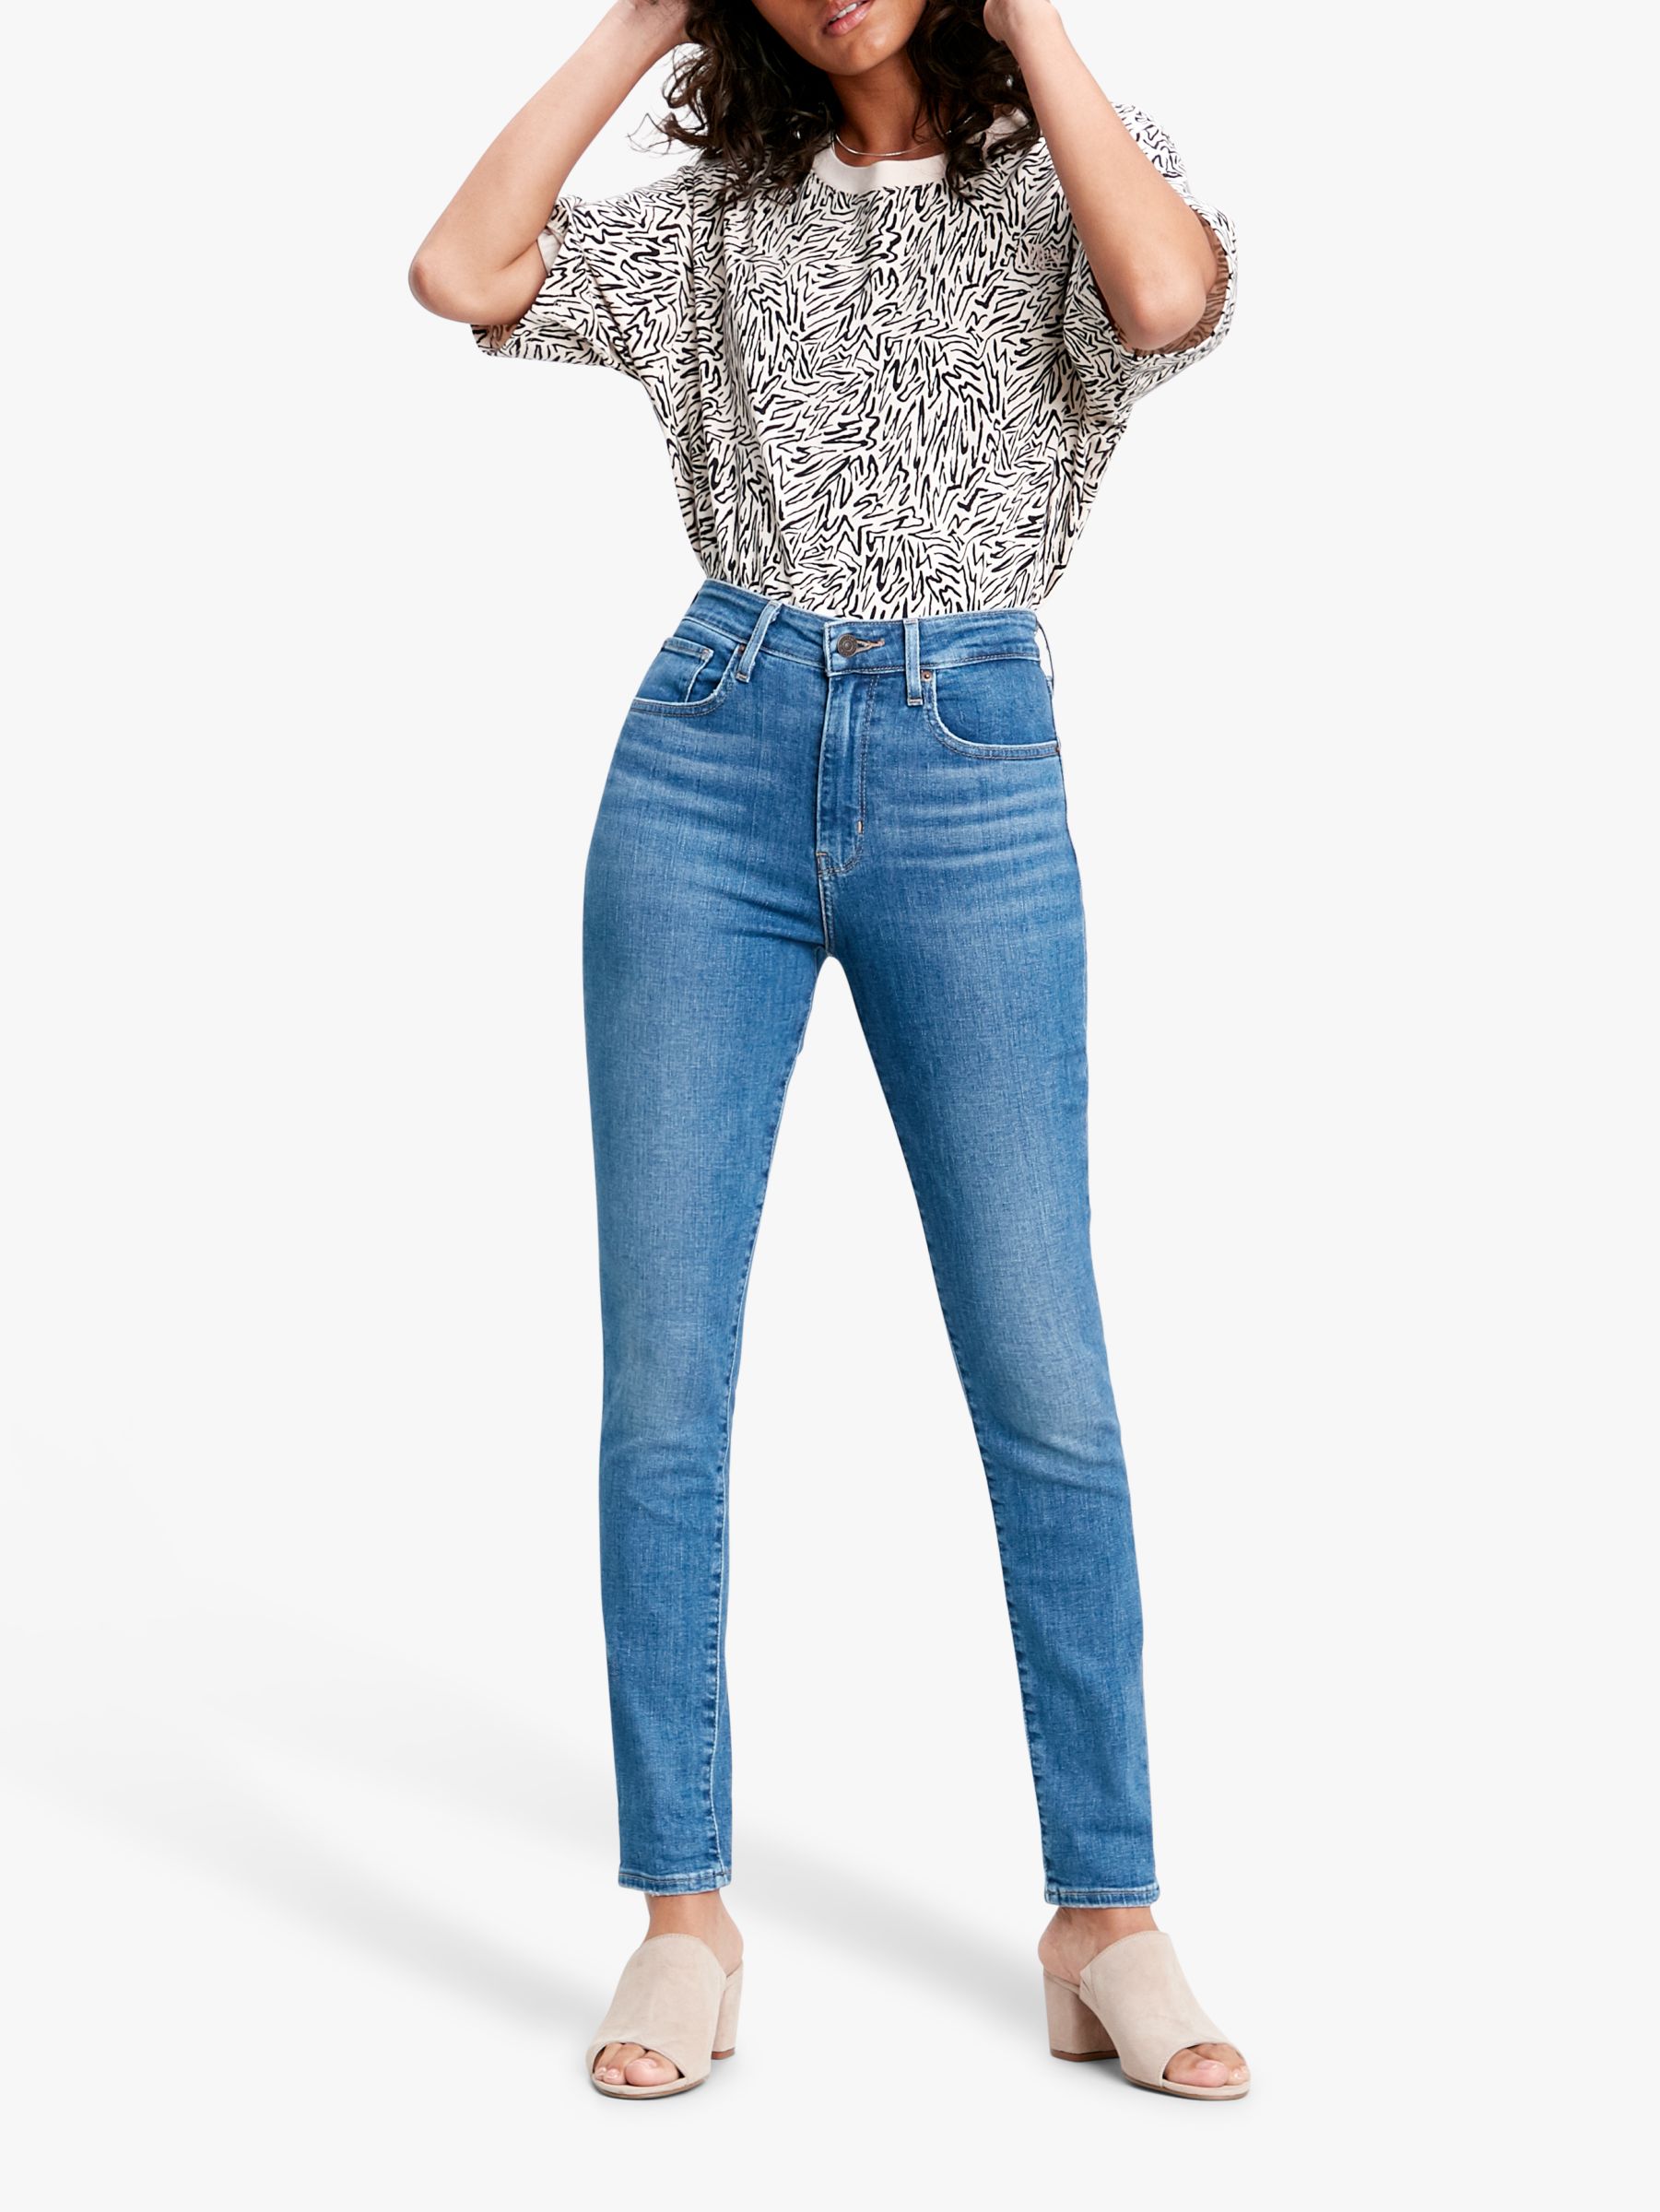 Levi's 721 High Rise Skinny Jeans, On 